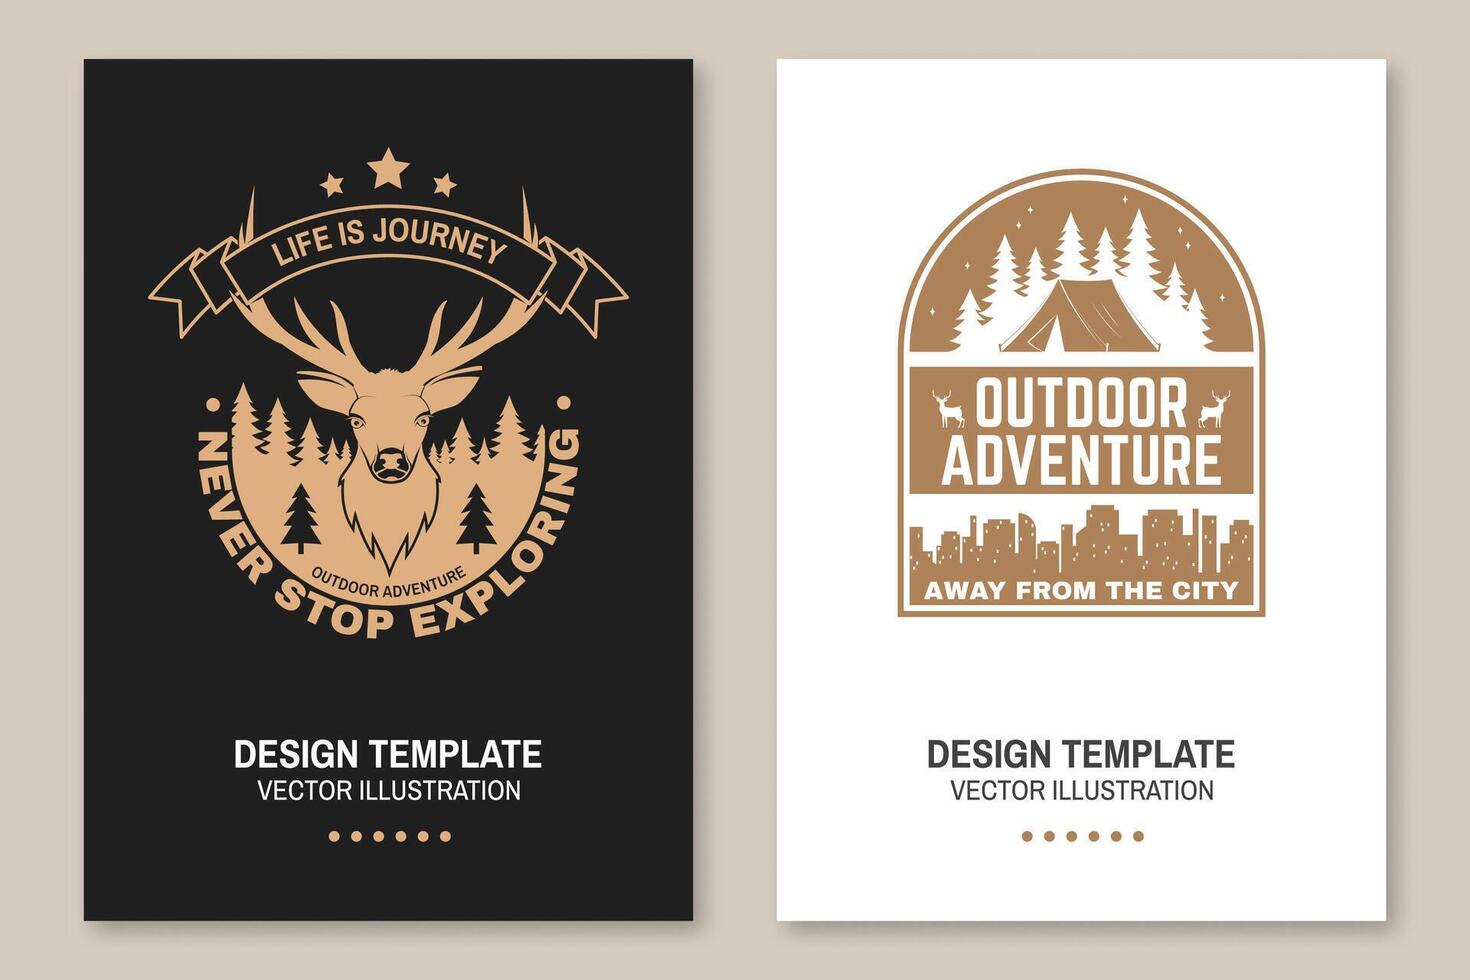 Life is journey. Never stop exploring. Outdoor adventure. Vector illustration. Concept for shirt, logo, print, stamp or tee. Vintage typography design with elk, forest landscape silhouette